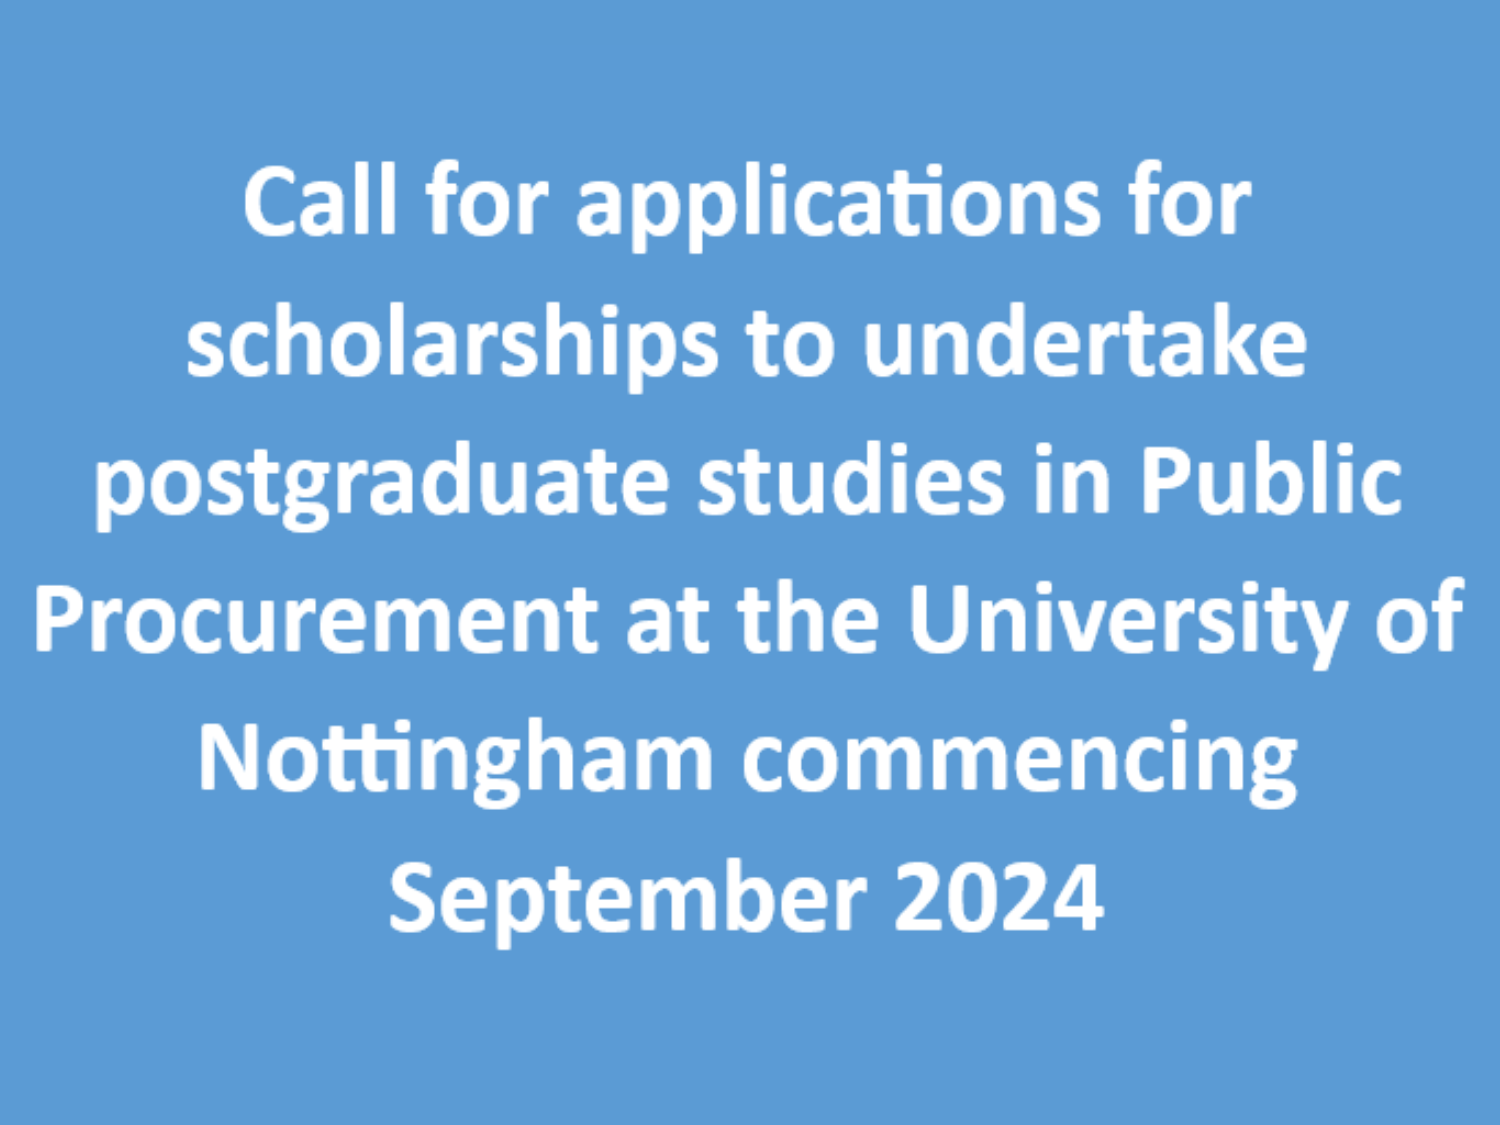 Call for Applications for Scholarships to Undertake Postgraduate studies in Public Procurement